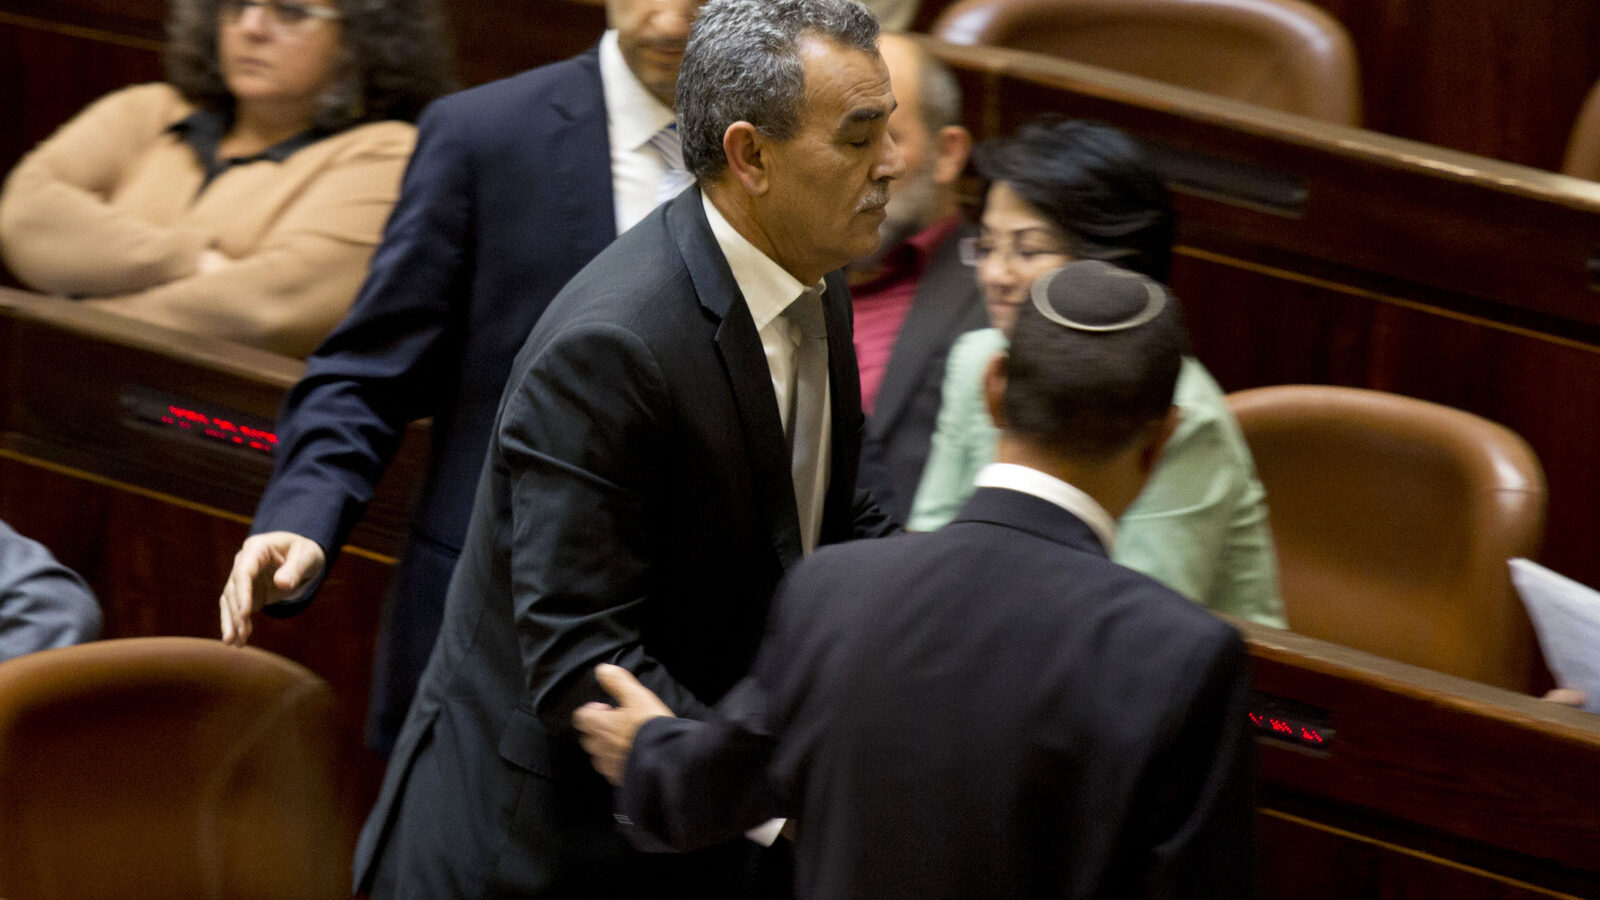 Jamal Zahalka an Israeli-Arab lawmaker from the Joint Arab List, is taken from the plenum in the Knesset, Israel's parliament in Jerusalem, Monday, Feb. 8, 2016. Israel’s government is promoting legislation to ban three Arab lawmakers who met with families of Palestinians who carried out deadly attacks. The Arab parliamentarians, Hanin Zoabi, Basel Ghattas and Jamal Zahalka, met the families last week to help lobby the release of some of their relatives’ bodies. (AP Photo/Ariel Schalit)